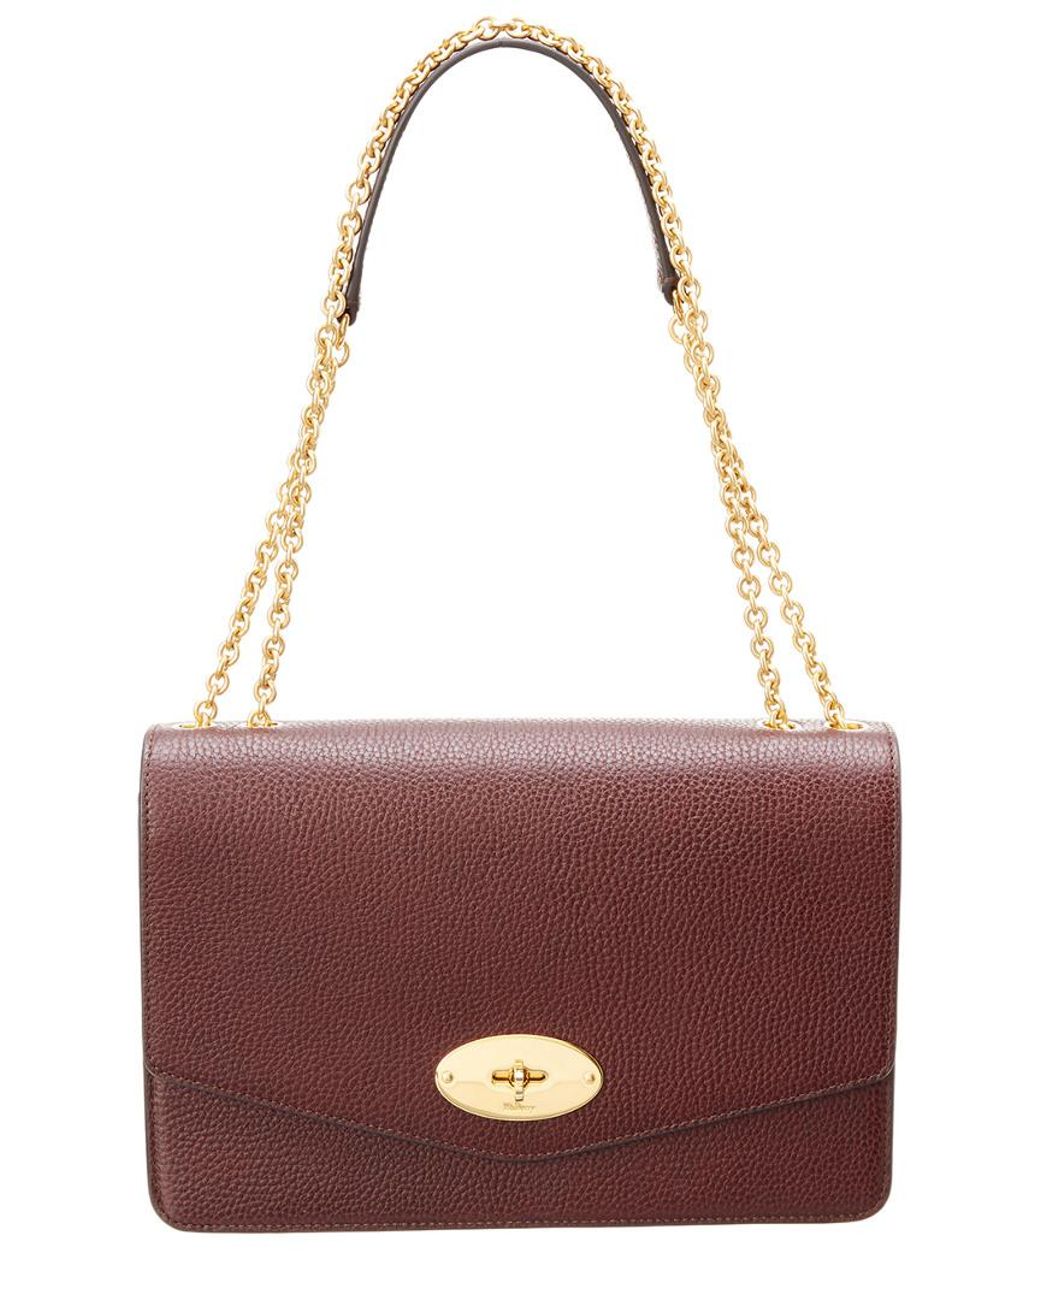 Mulberry Darley Large Leather Chain Shoulder Bag | Lyst